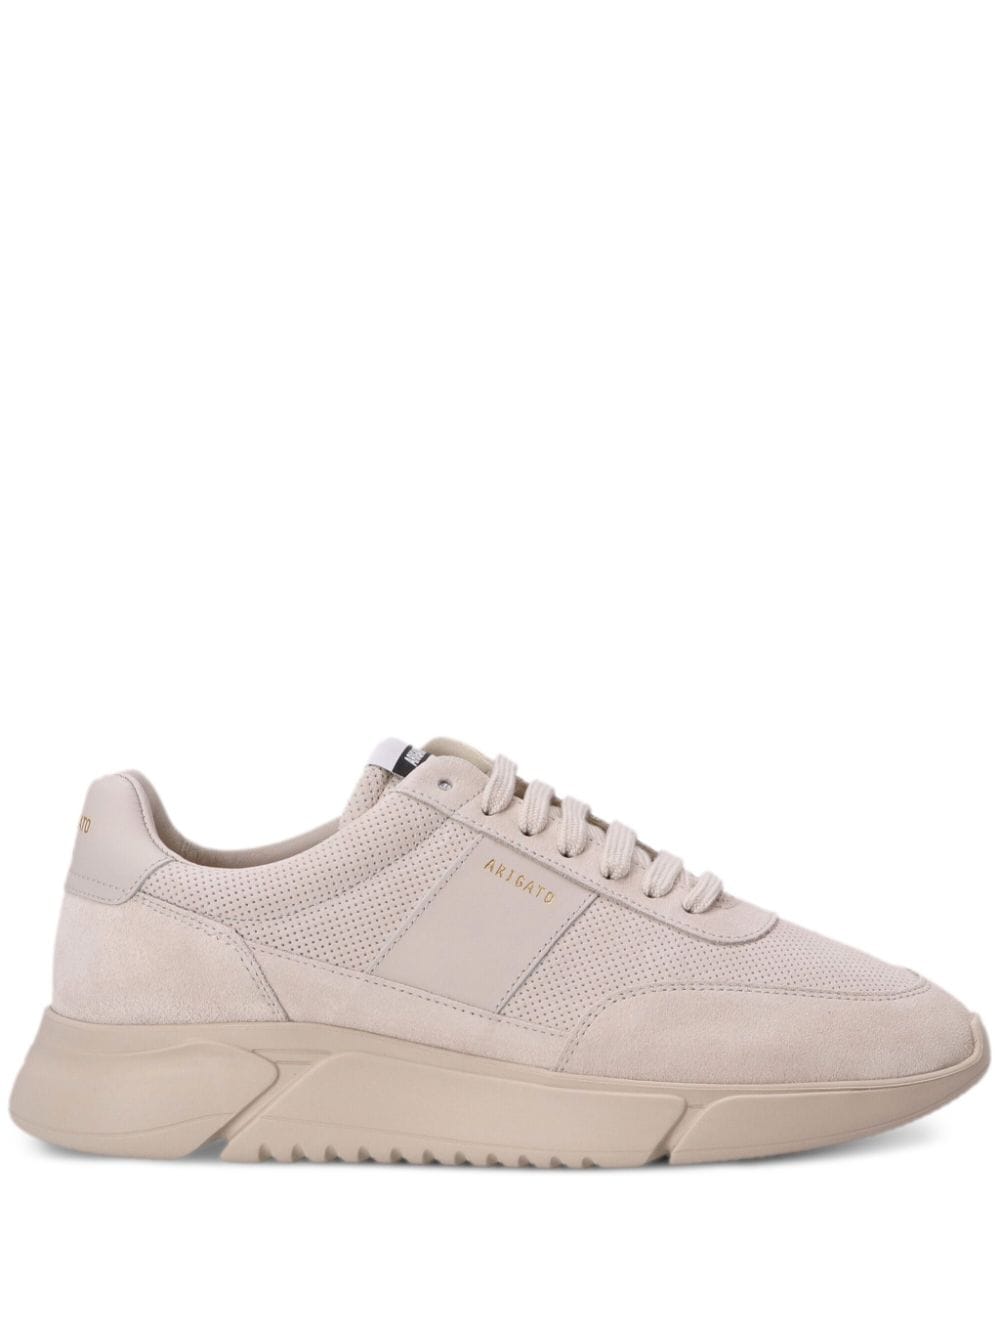 Axel Arigato Genesis Vintage Lace-up Sneakers In Neutrals